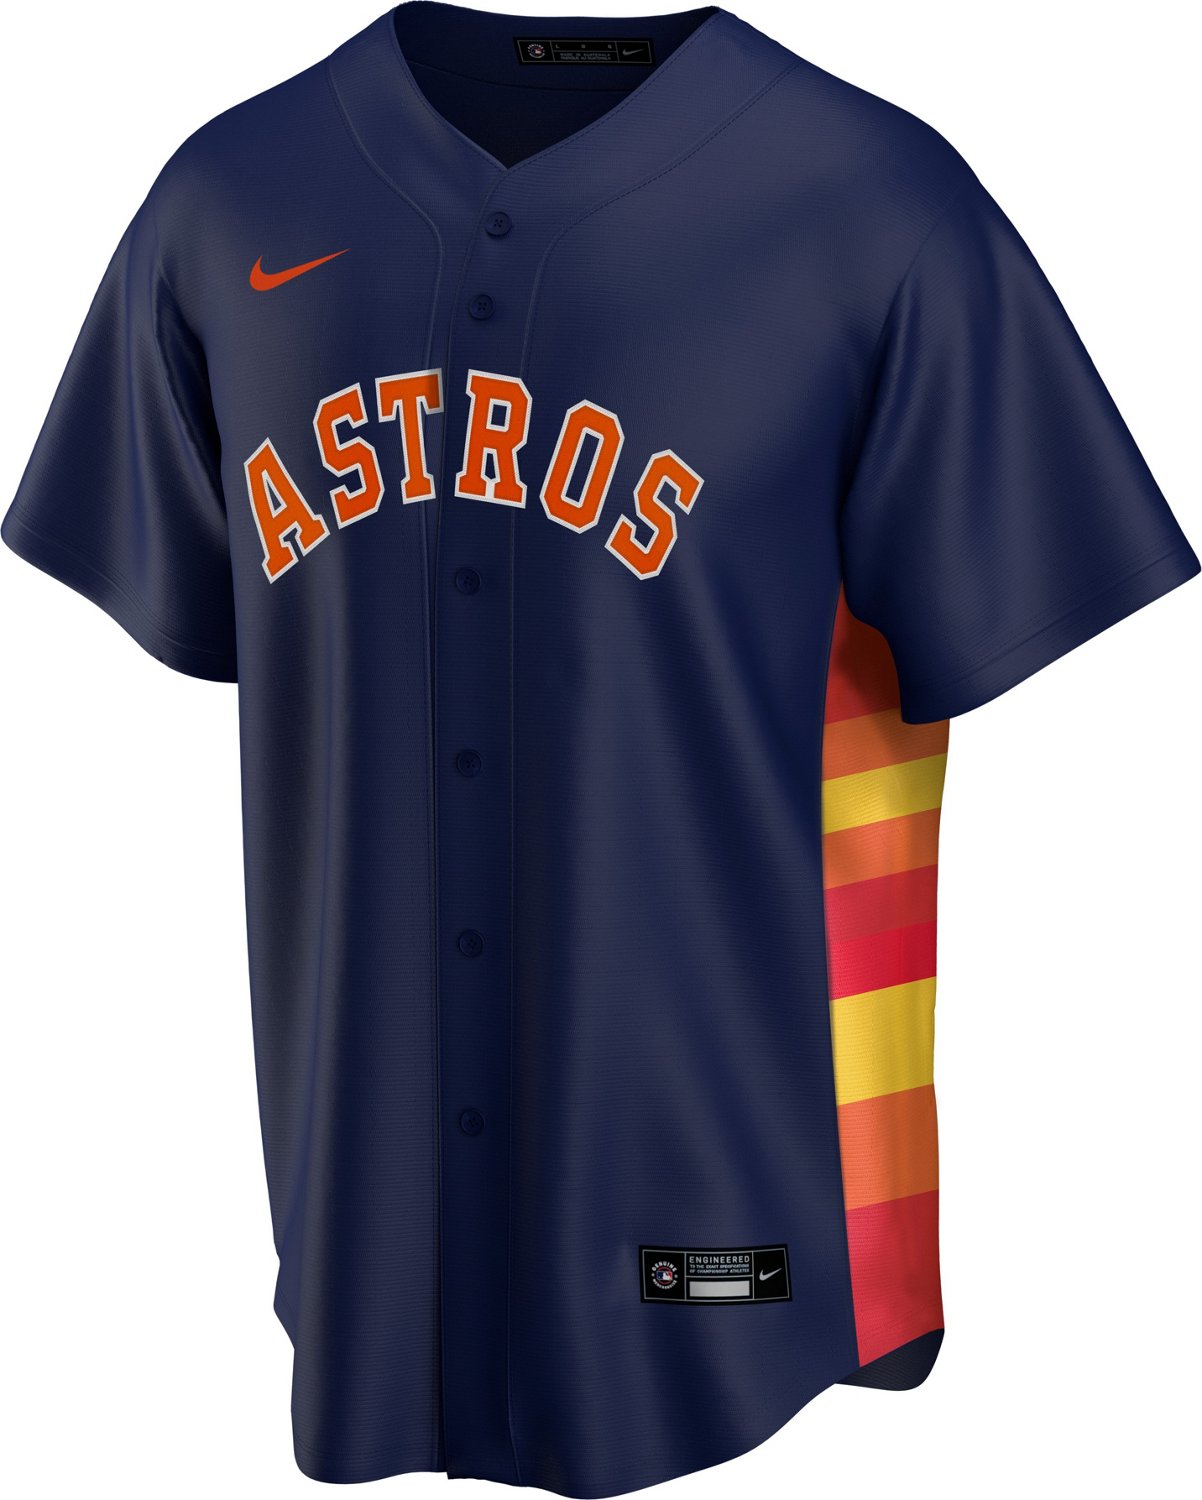 Simple question: What jersey should I get? : r/Astros